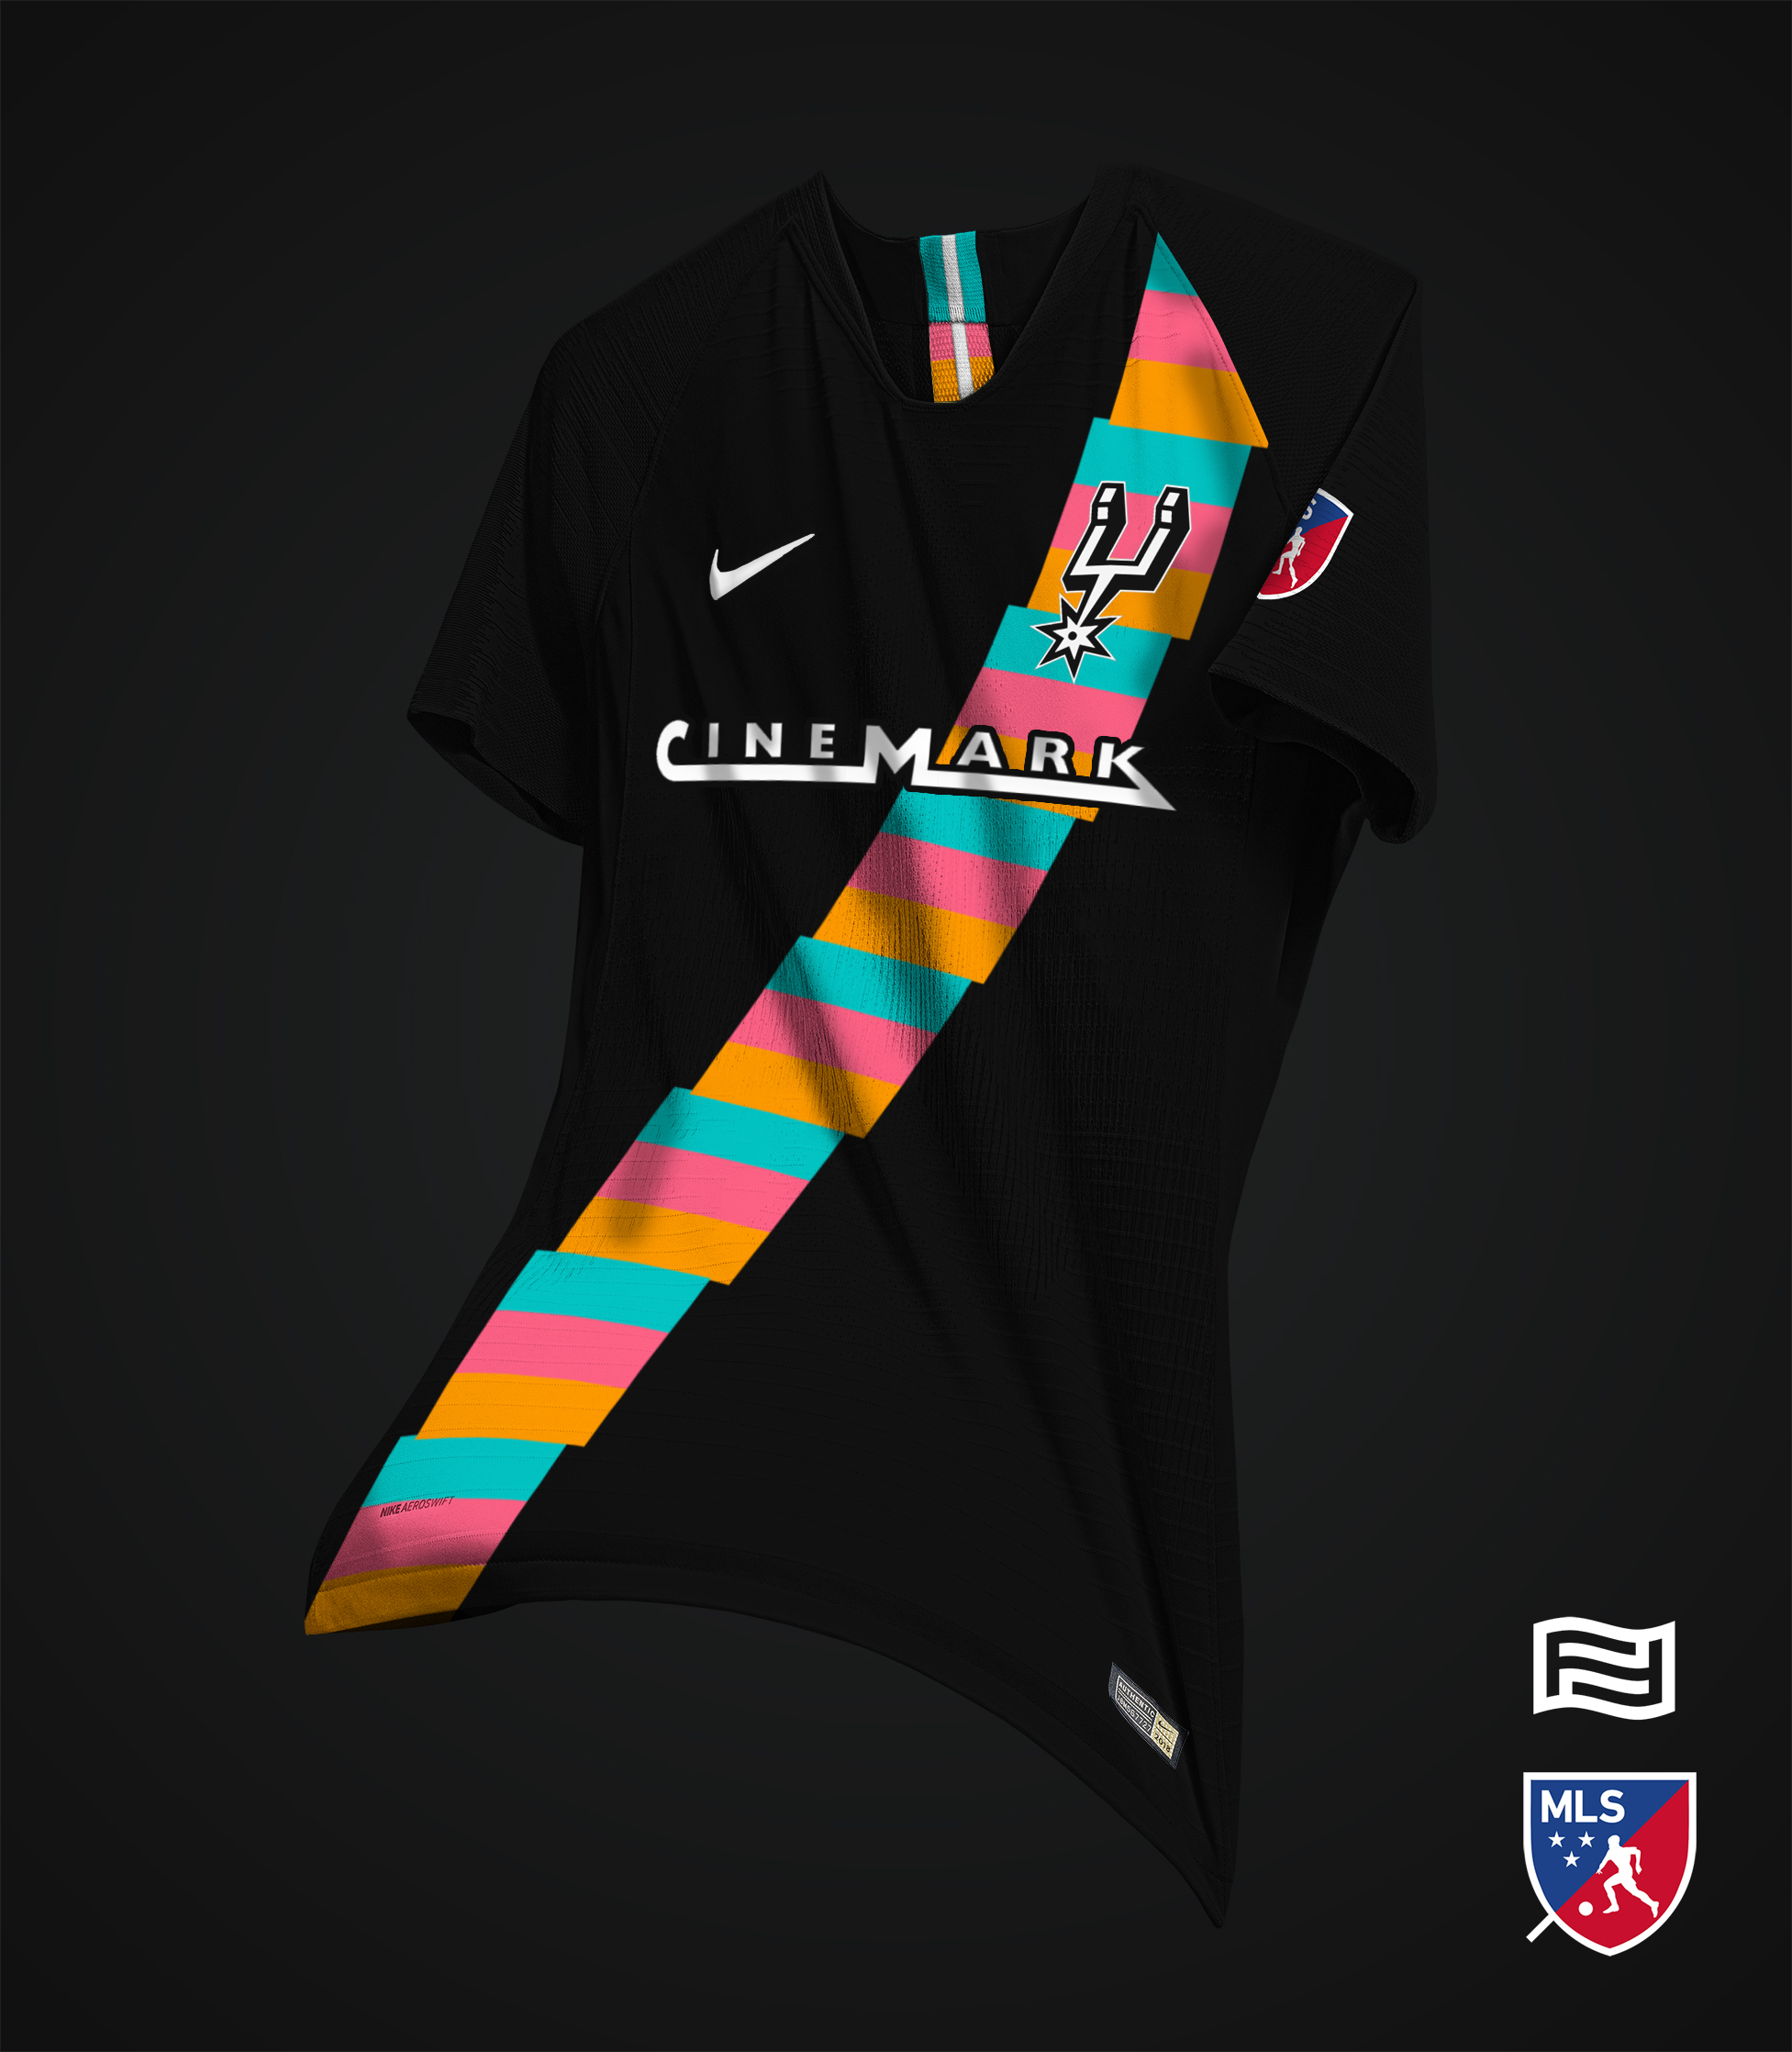 These NBA Football Kit Designs Are Incredibly Cool